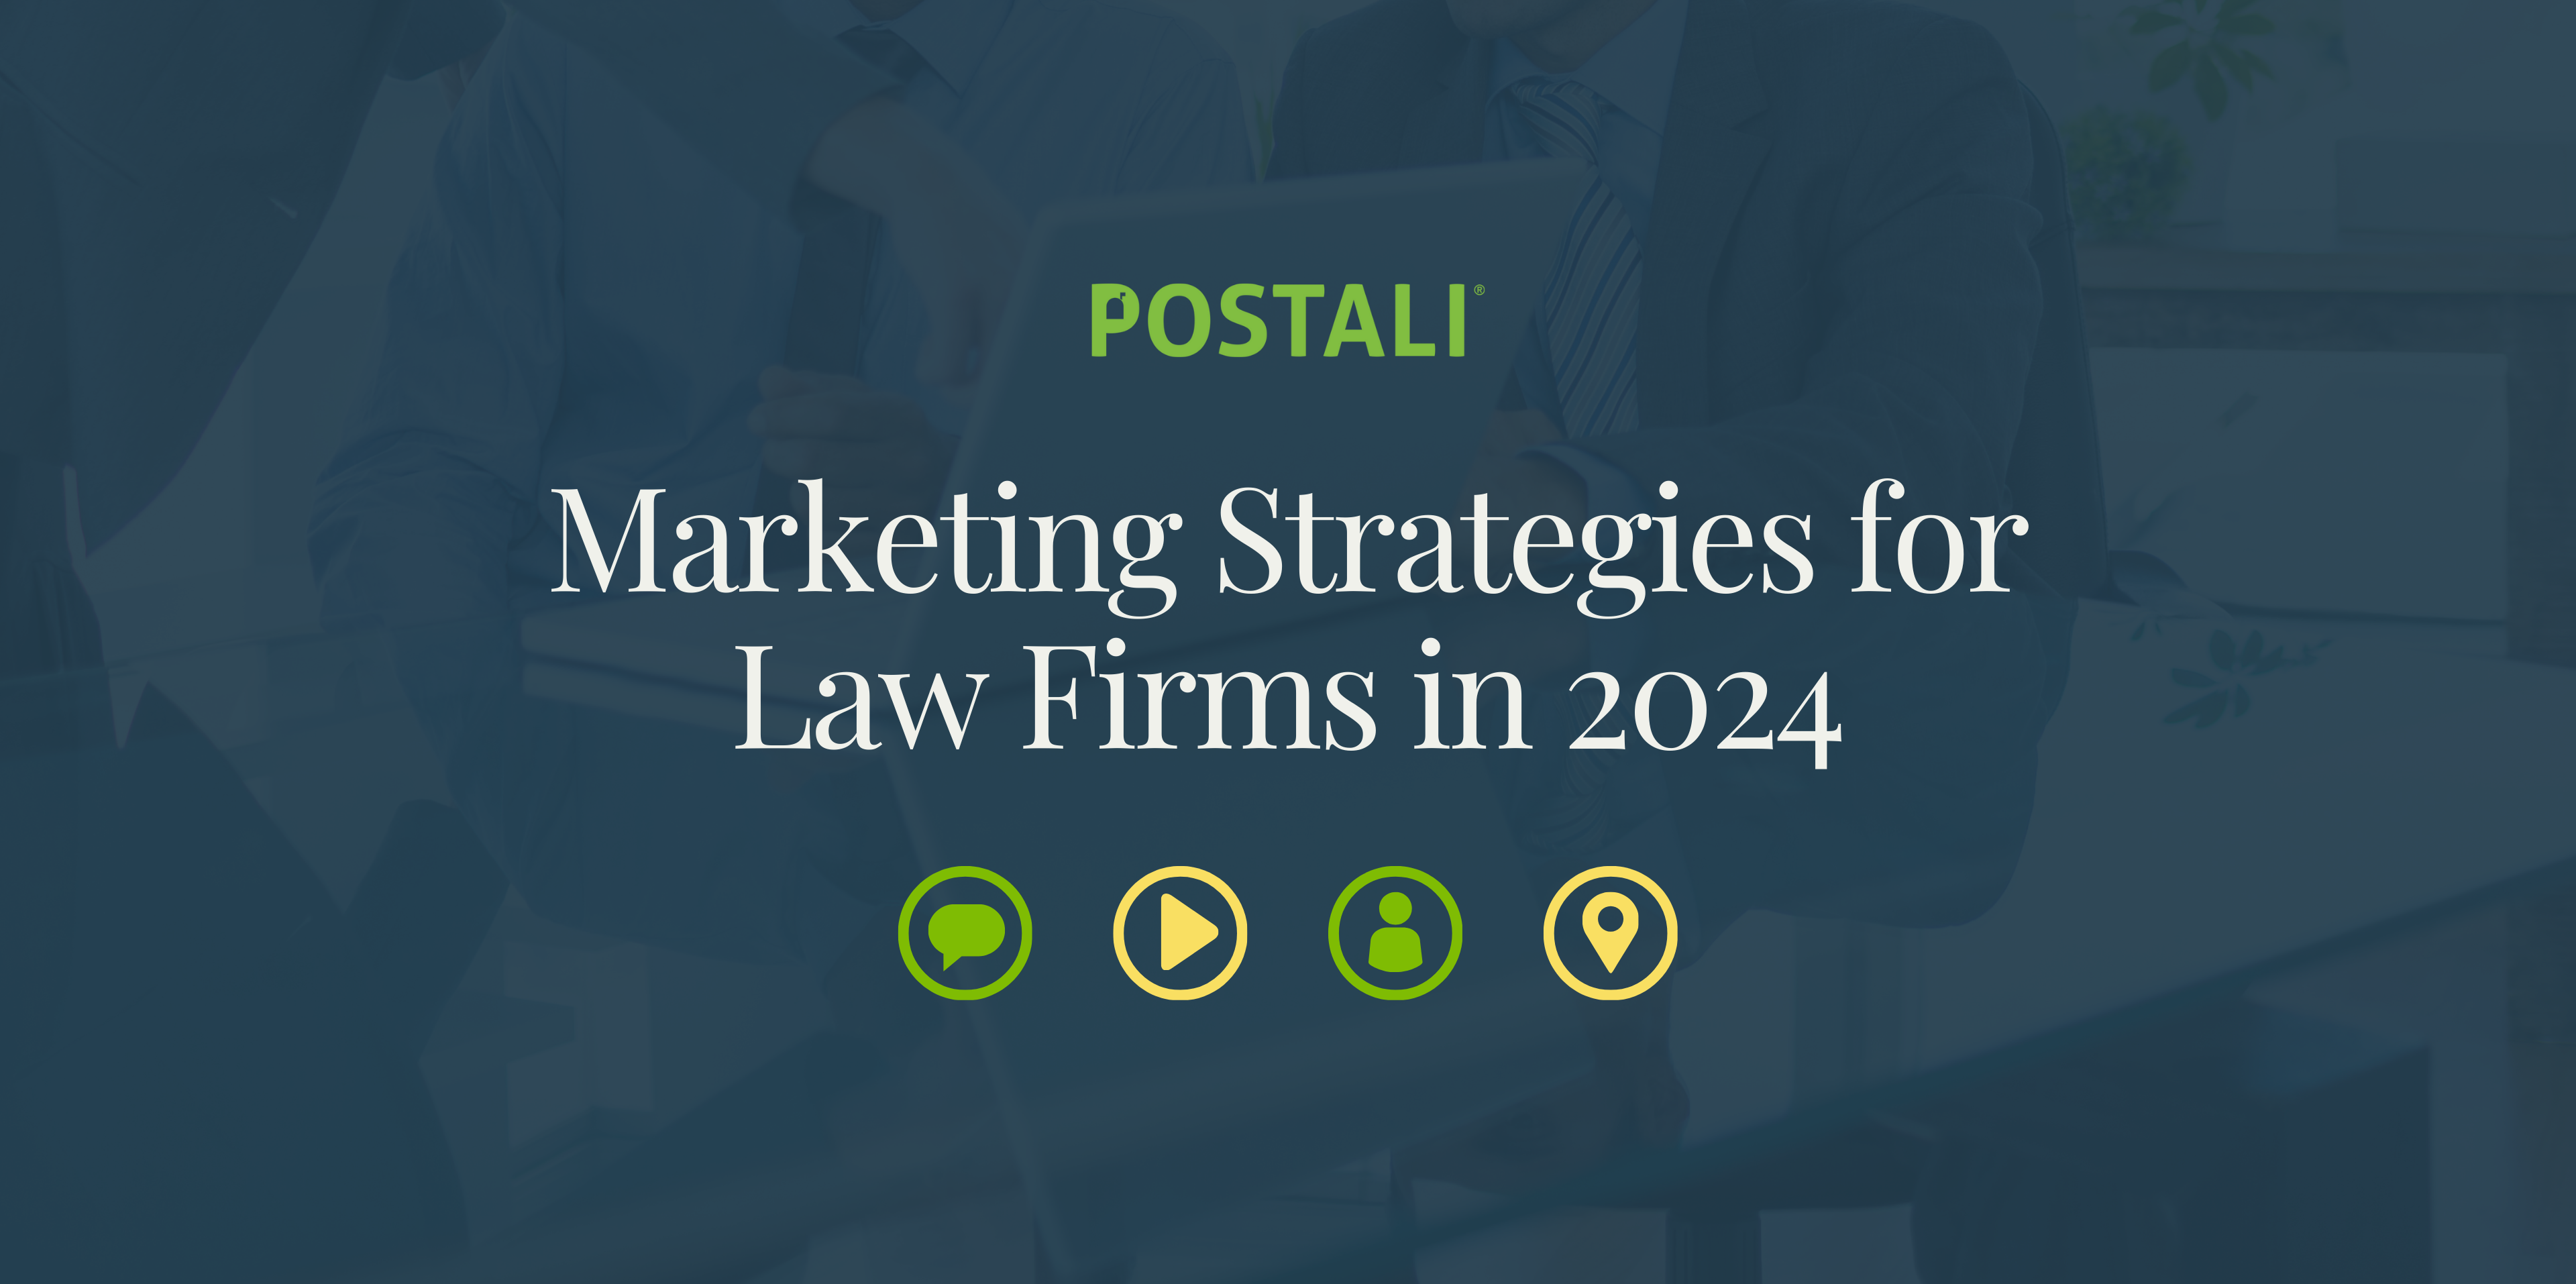 Cover photo of blog post that reads: Marketing Strategies for Law Firms in 2024.